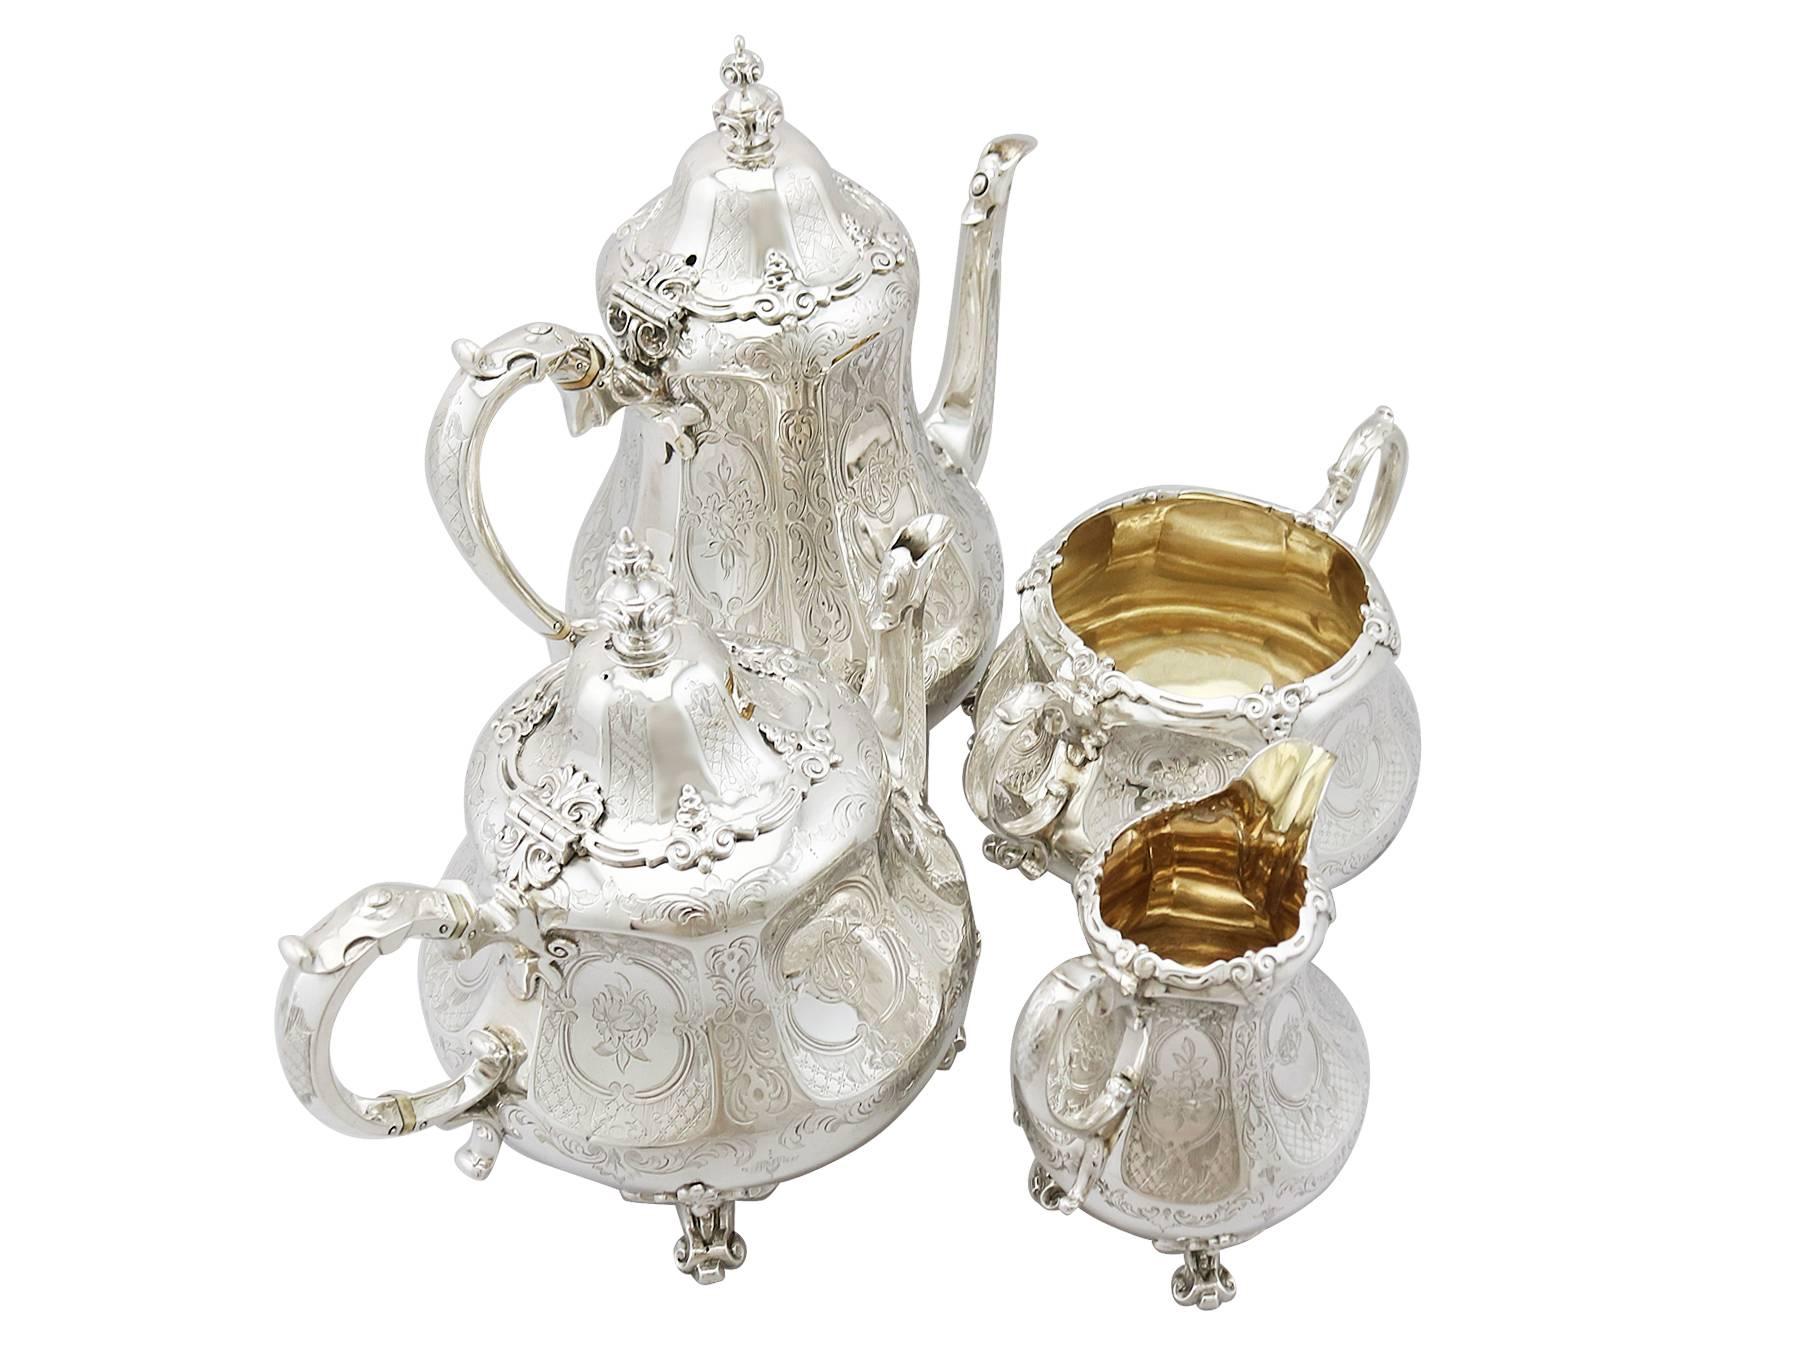 An exceptional, fine and impressive antique Victorian English sterling silver four piece tea and coffee service/set; part of our silver teaware collection.

This exceptional antique Victorian sterling silver four piece tea and coffee set/service